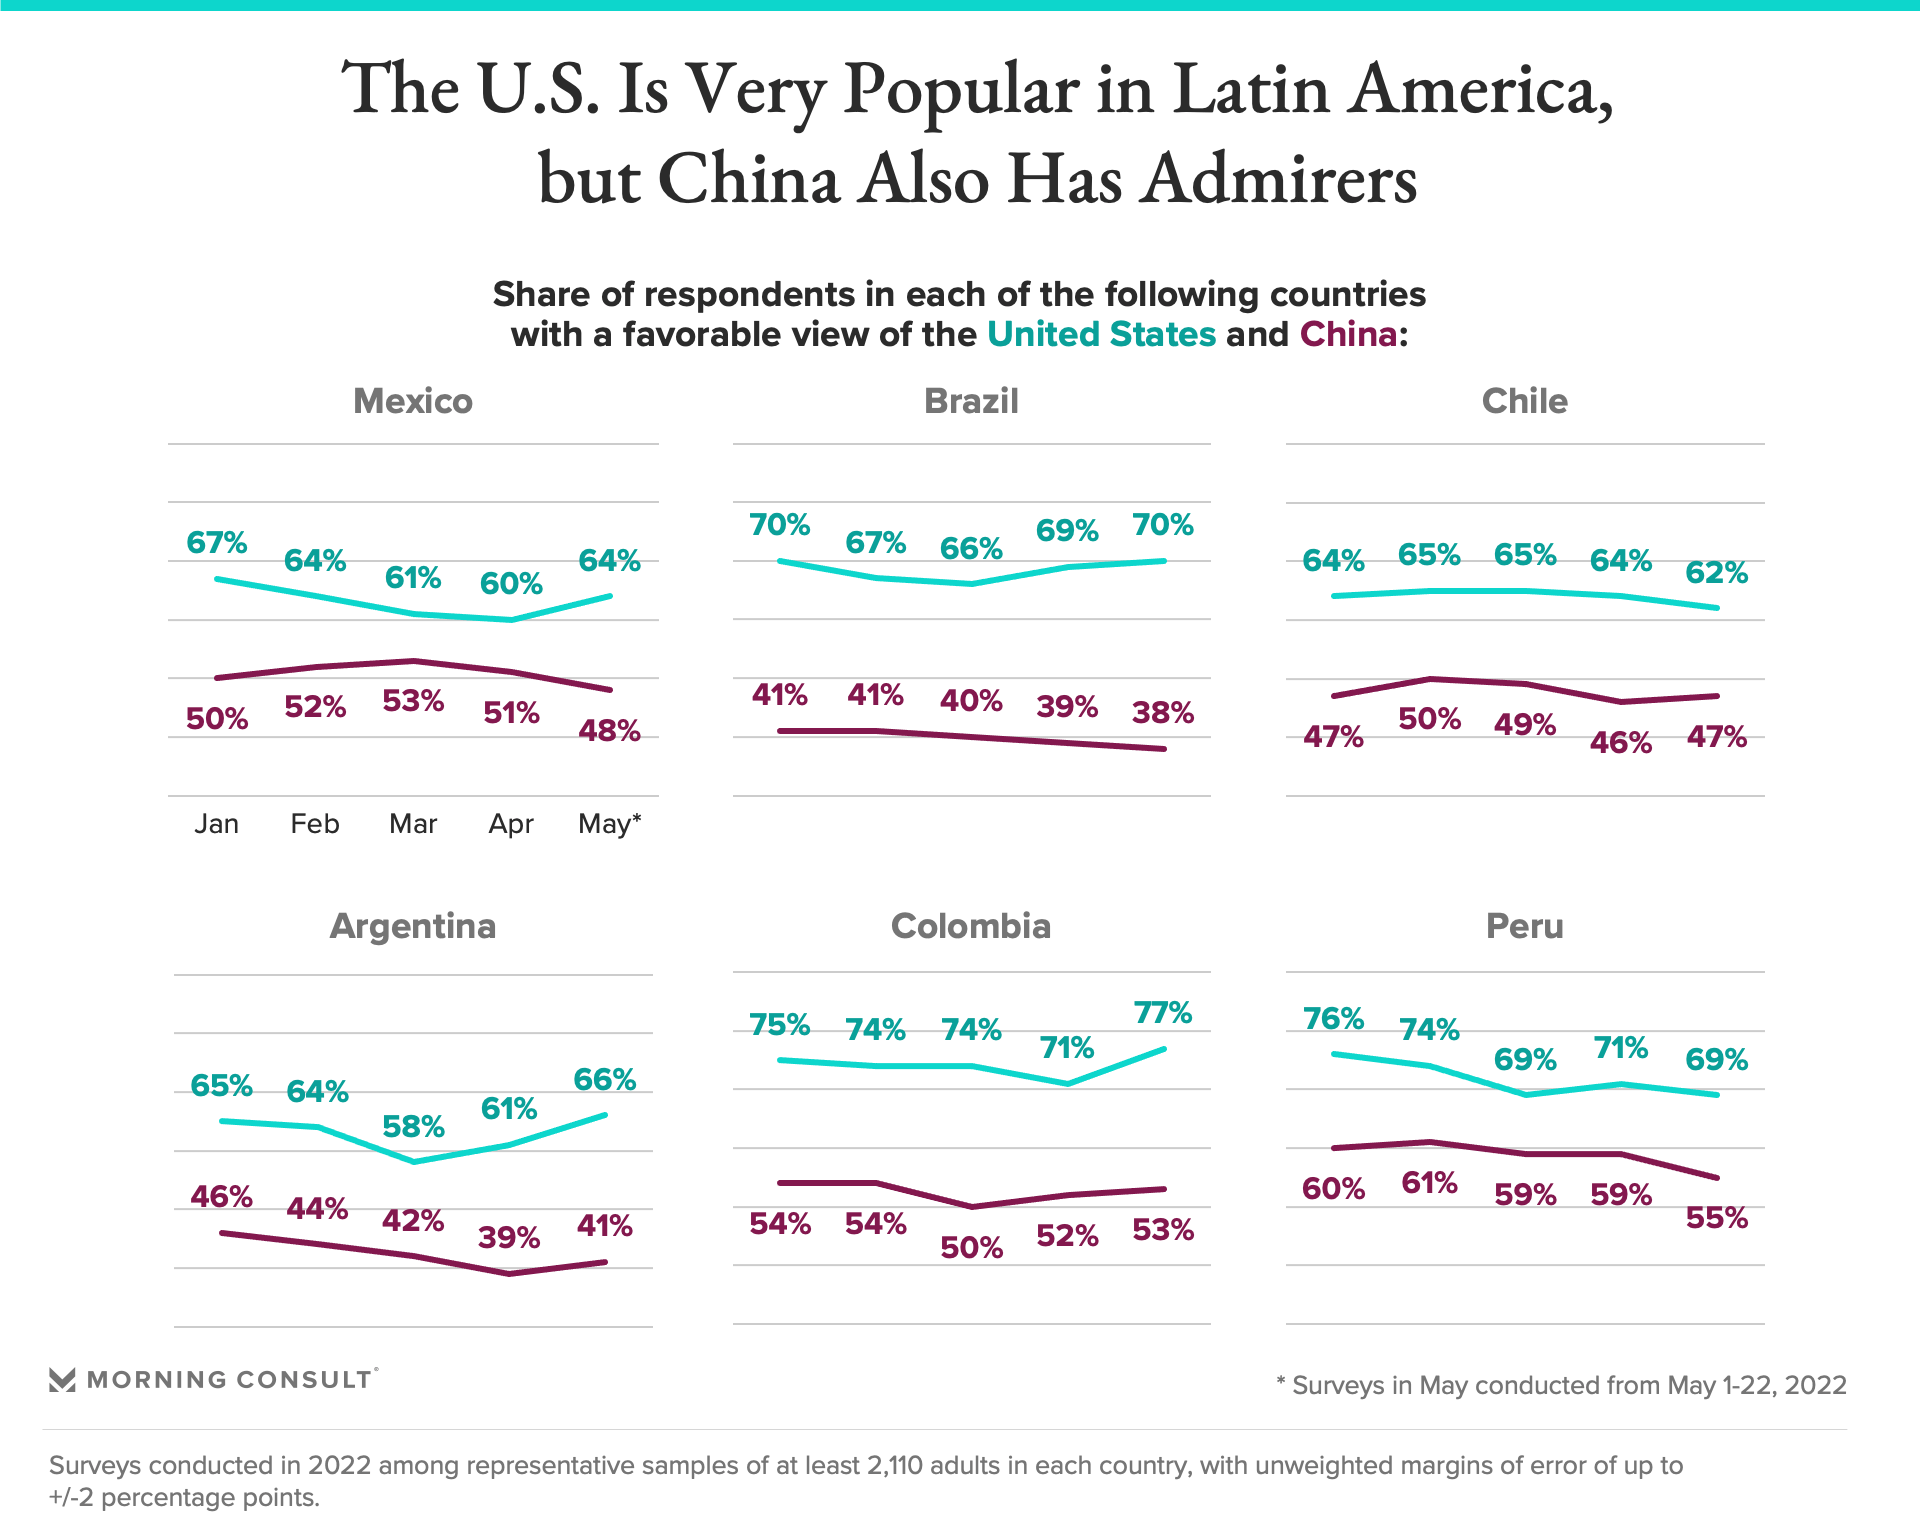 Graphs of U.S. popularity versus China's popularity in select Latin American countries